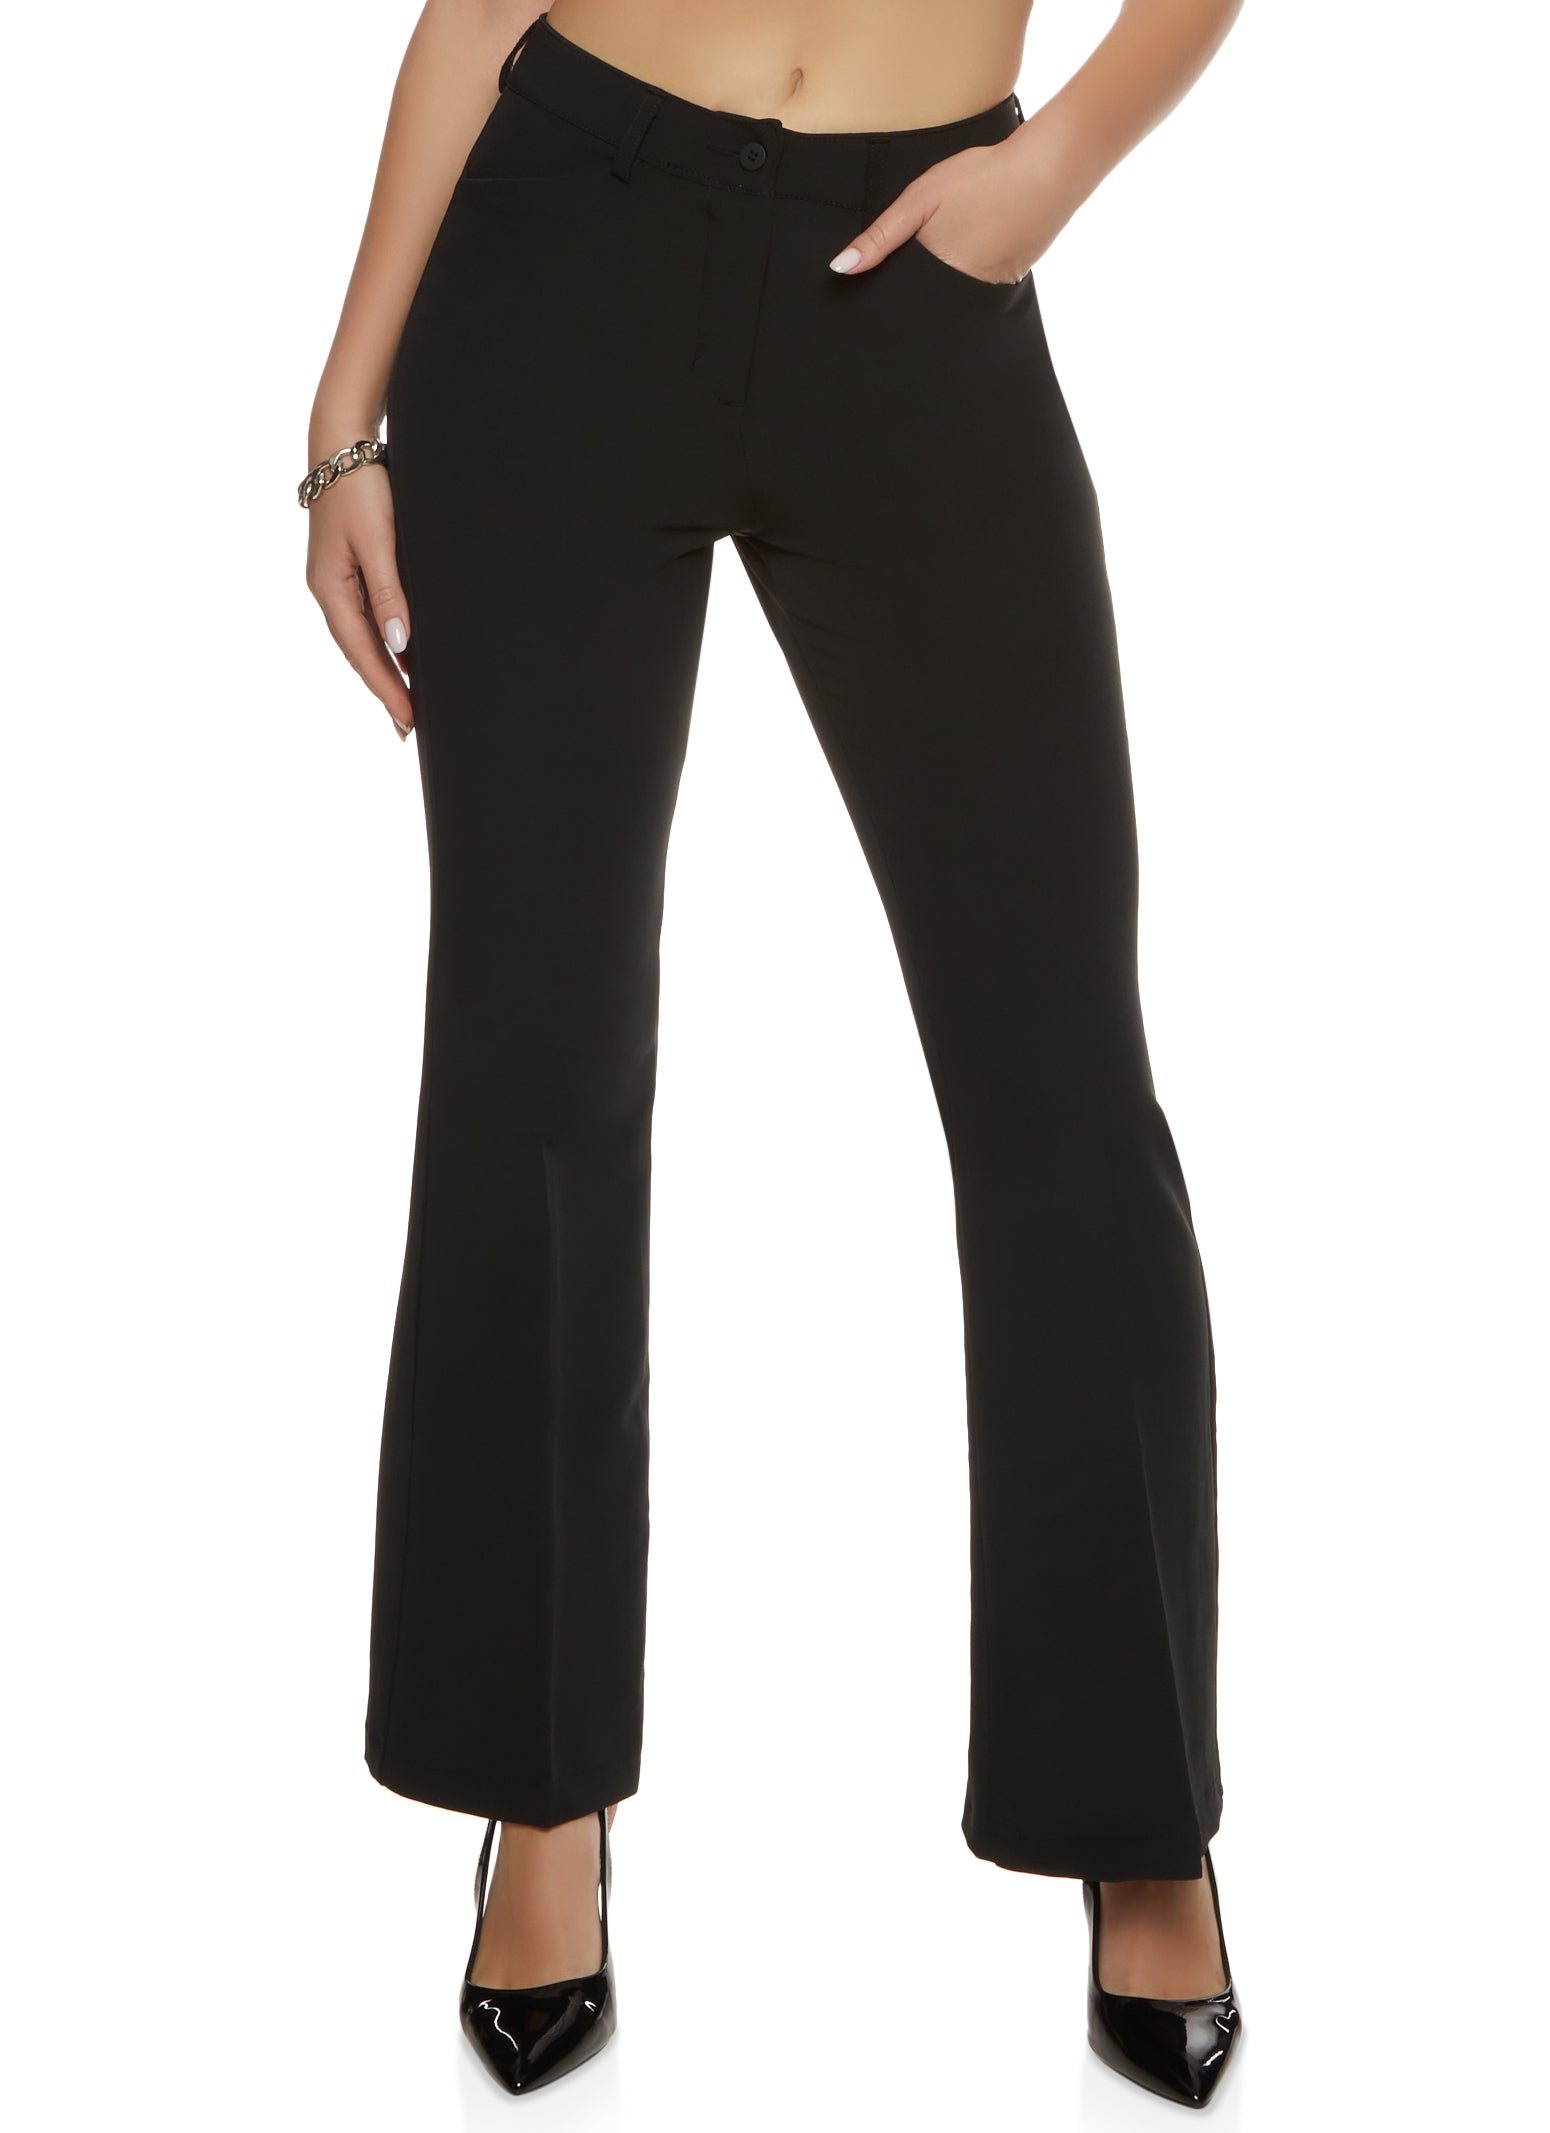 Buy Adore Wear Stylish Stretchable Boot Cut Trouser for Women (S, Black) at  Amazon.in